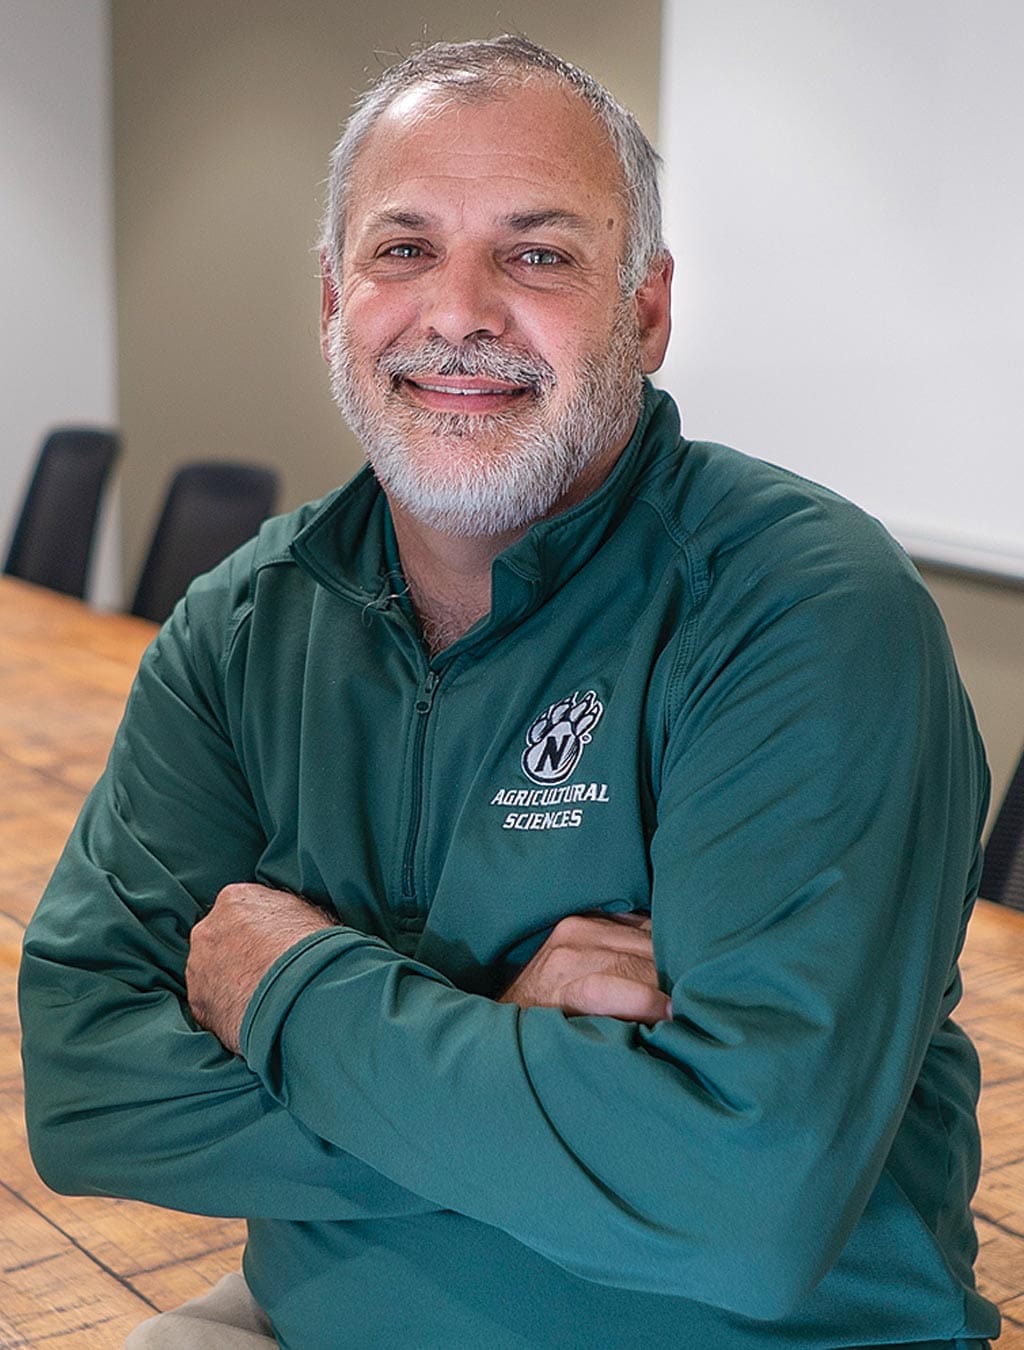 Rod Barr, director of NWMSU’s School of Agricultural Sciences